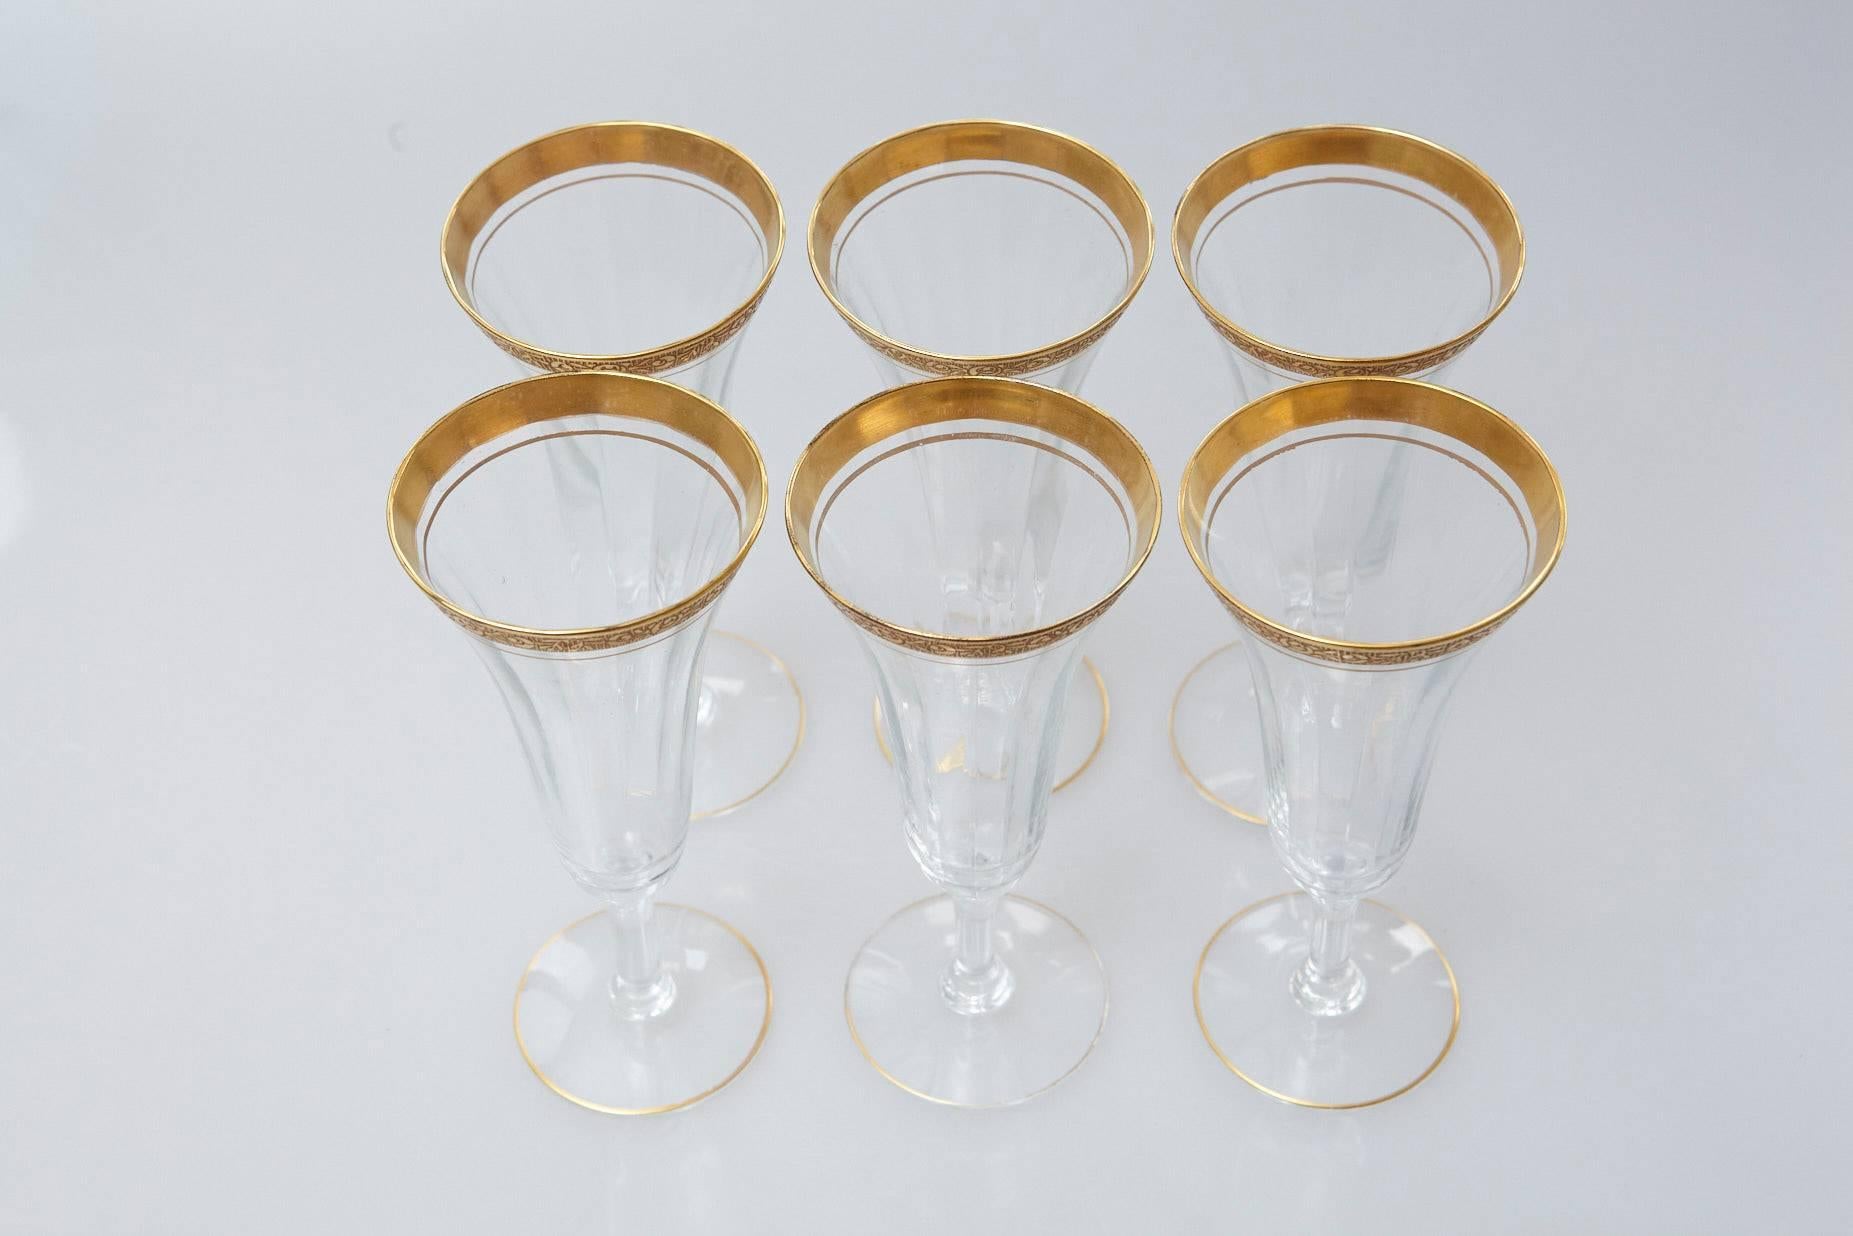 Early 20th century set of six champagne flutes featuring an etched floral gilt design around the rim and a stripe of gold around the base.
Good vintage condition, no chips to the rim or base.